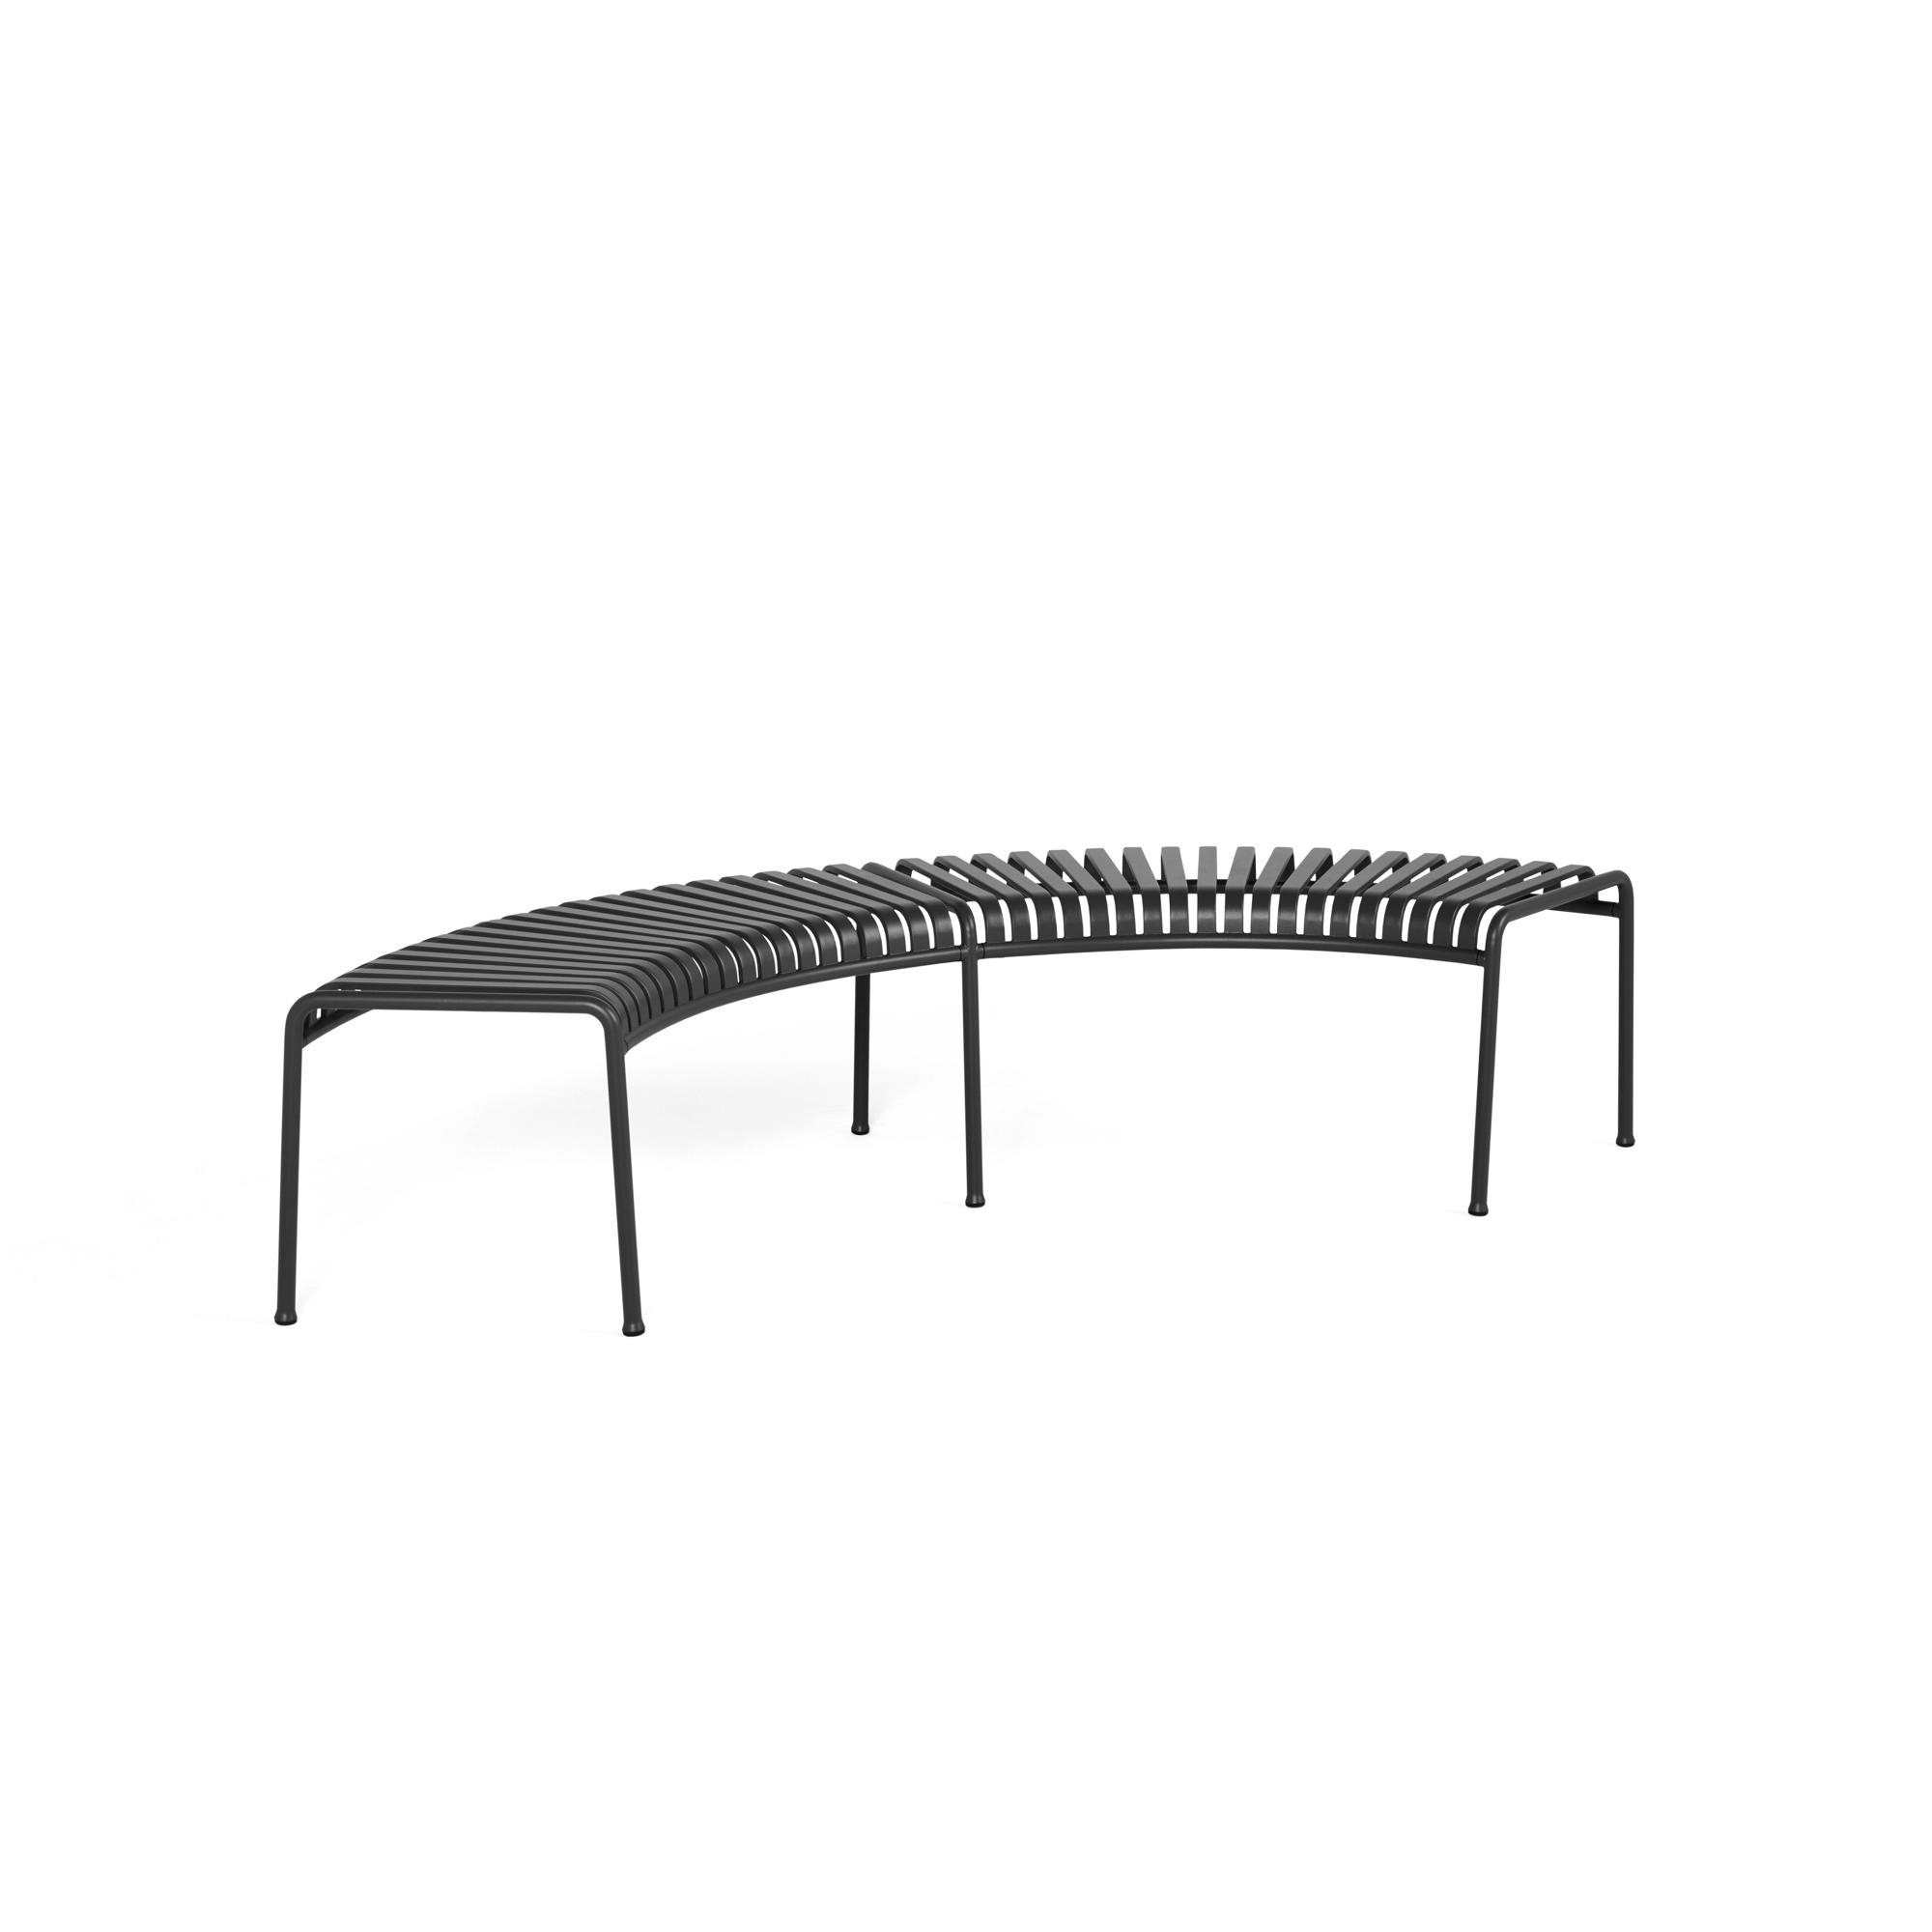 HAY Palissade Park Bench Set of 2 Freestanding Anthracite